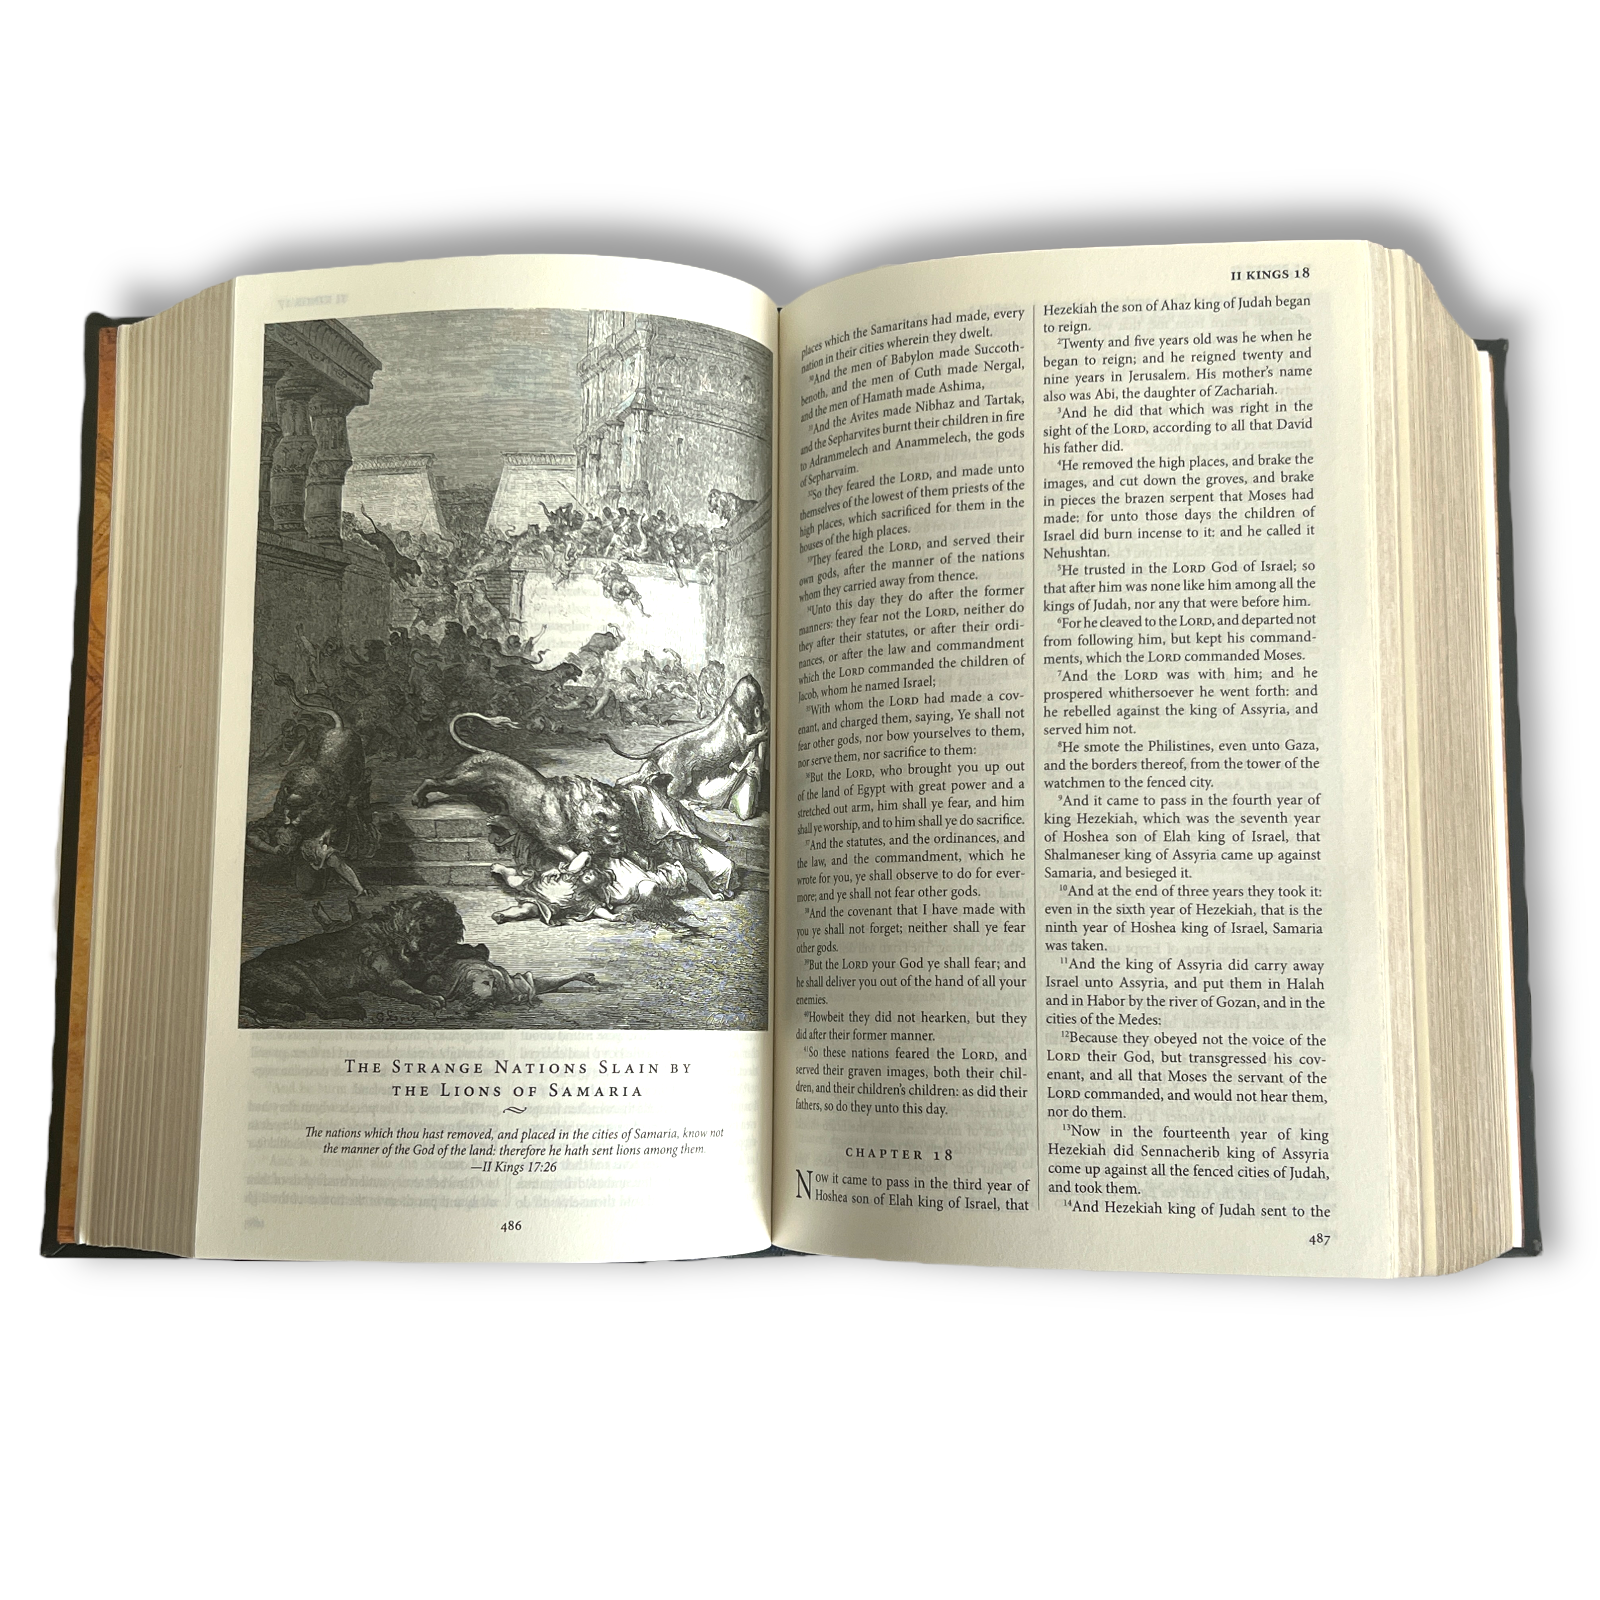 Holy Bible: King James Version (Barnes & Noble Collectible Editions) by  Gustave Dore, Hardcover